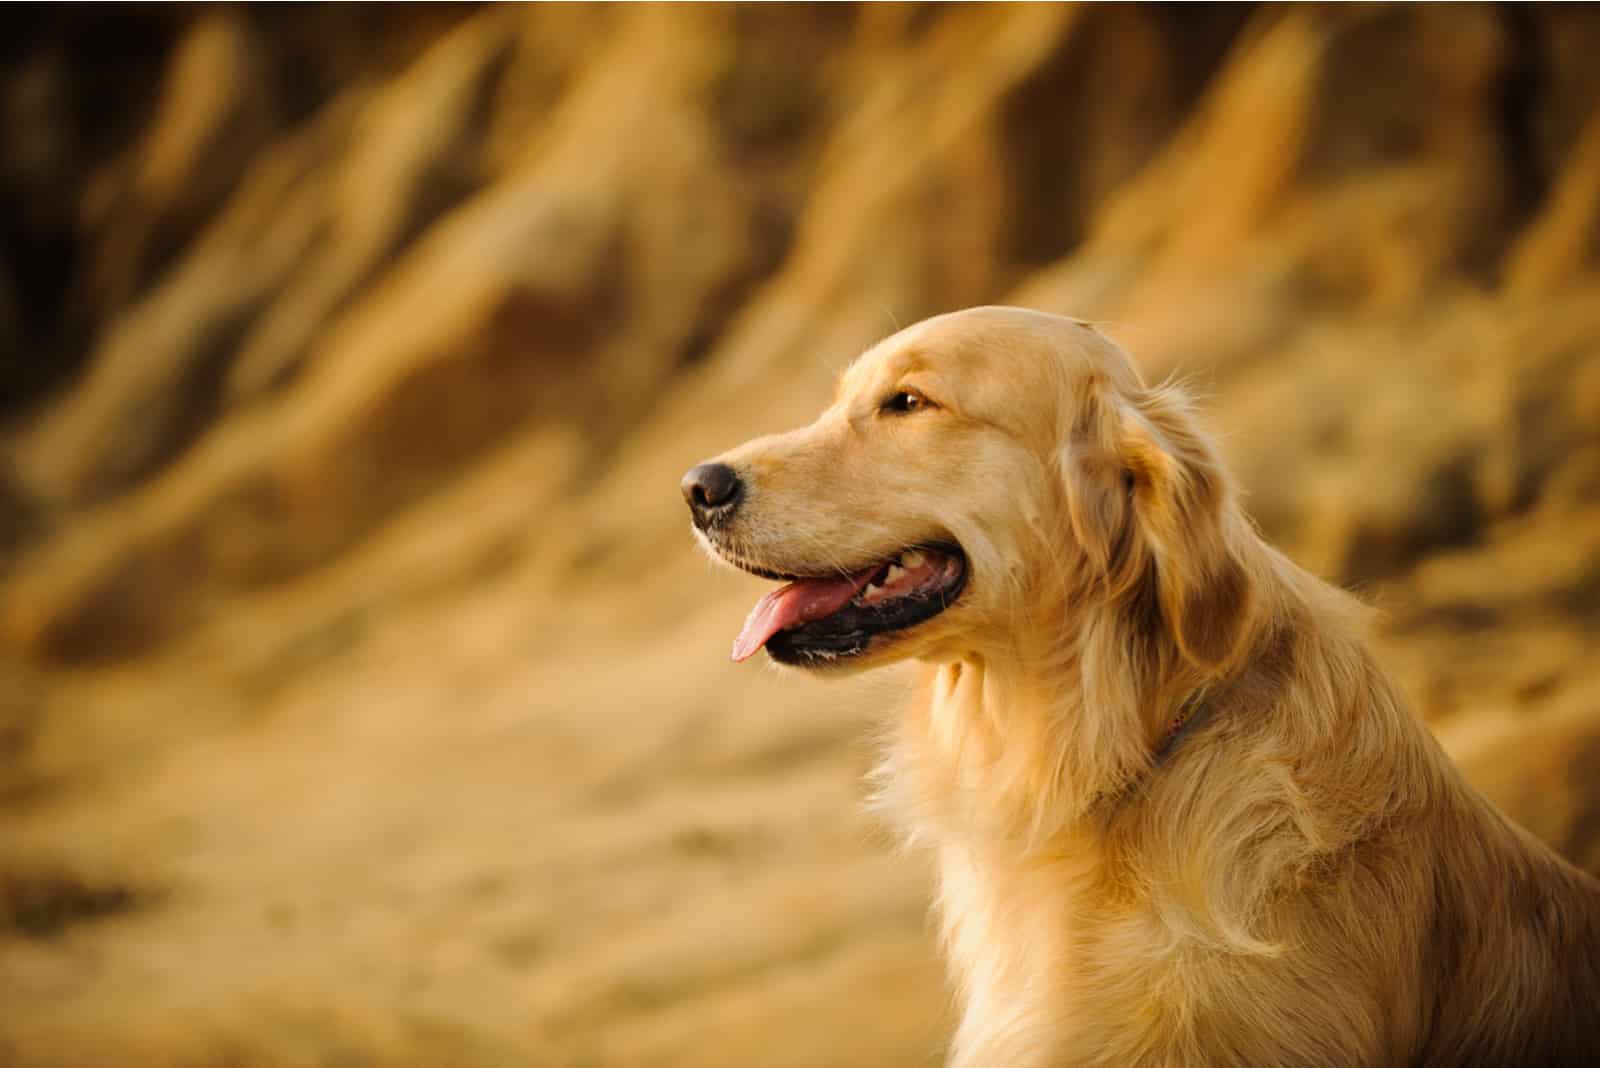 The Golden Retriever sits and looks ahead